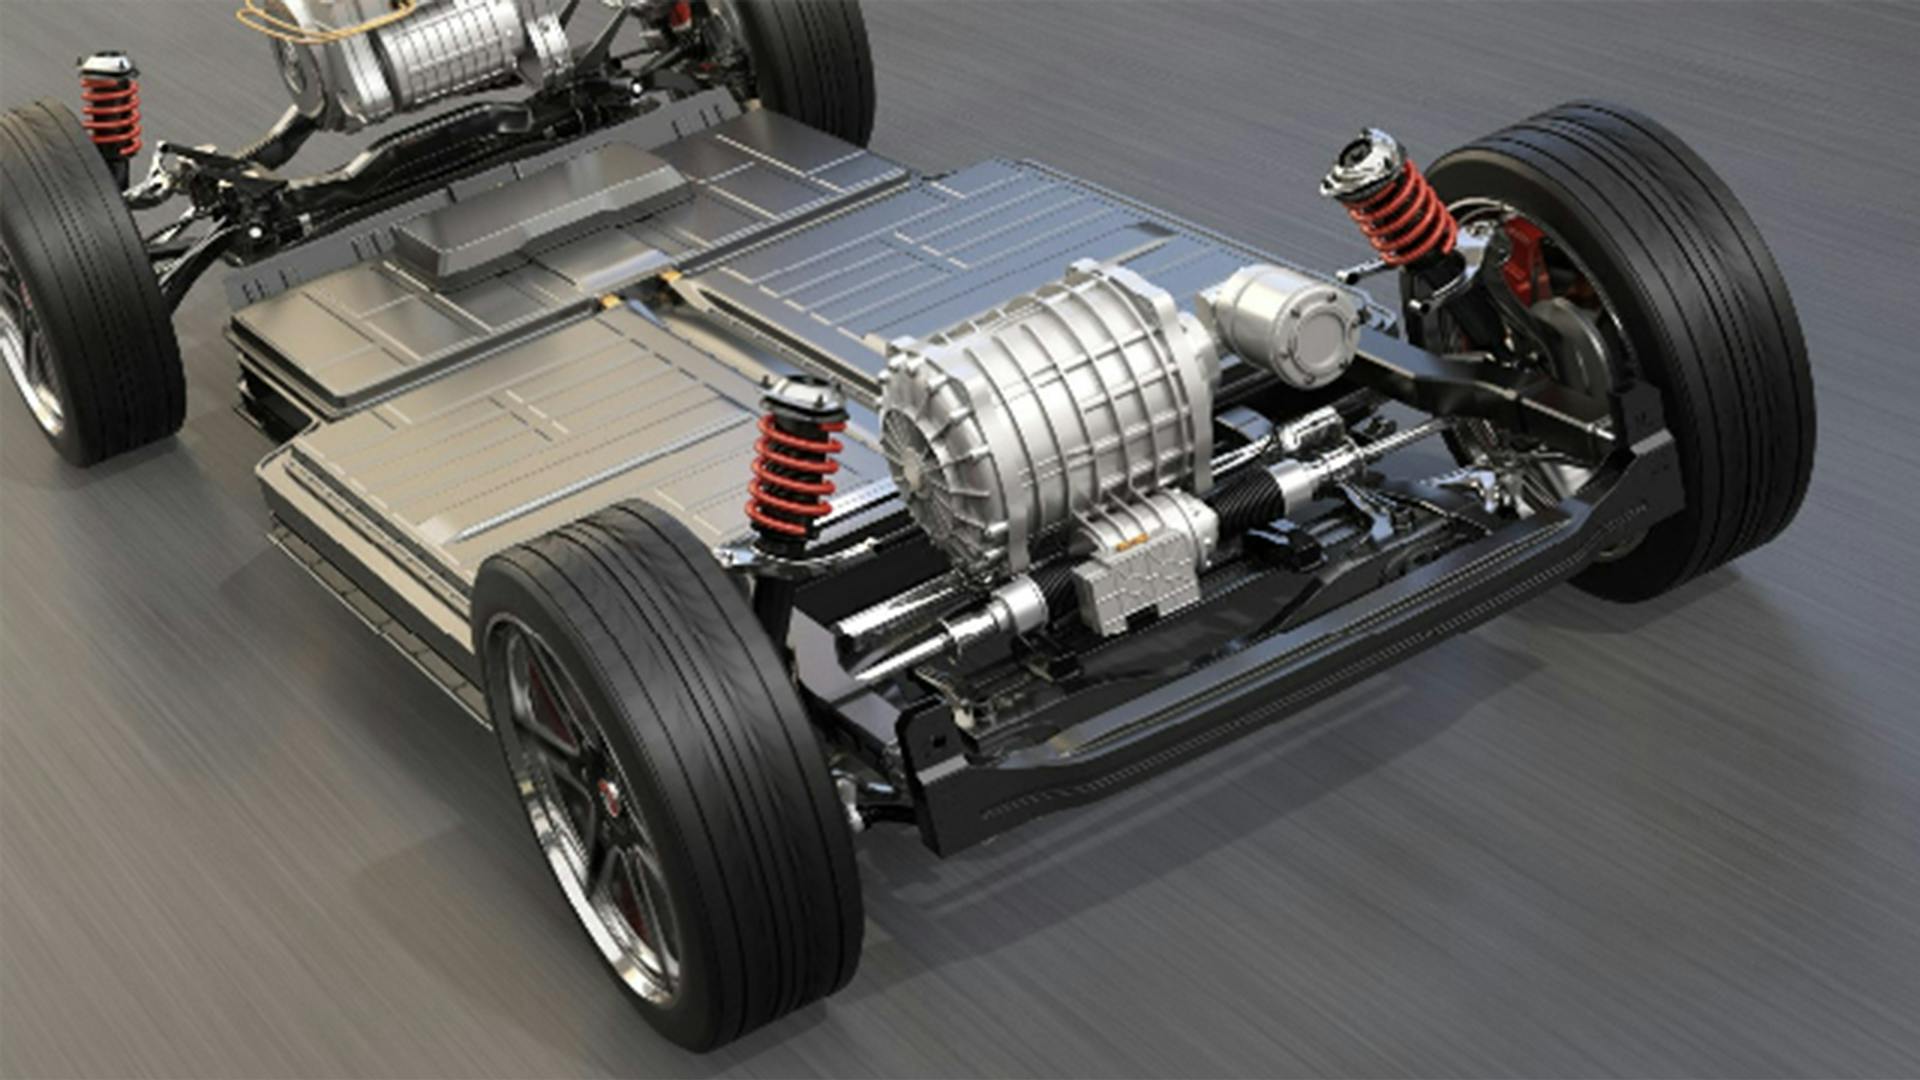 3D rendered image of an e-powertrain developed for vehicle electrification.